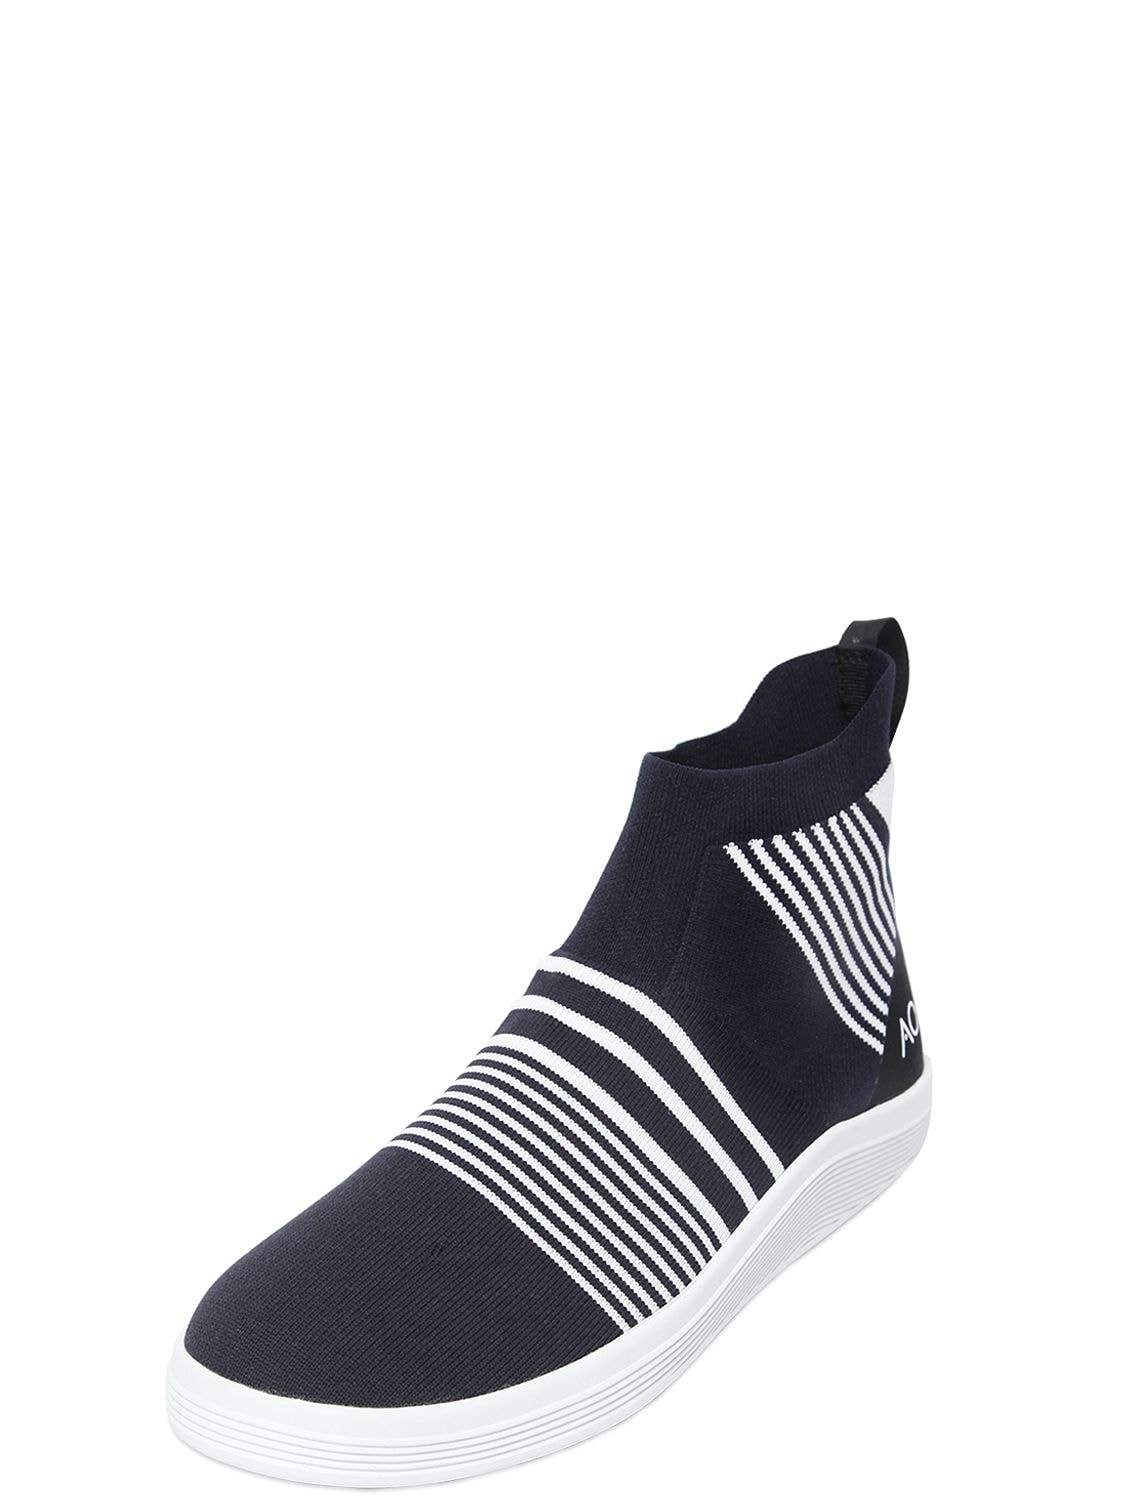 Striped Knit Slip-on High Top Sneakers